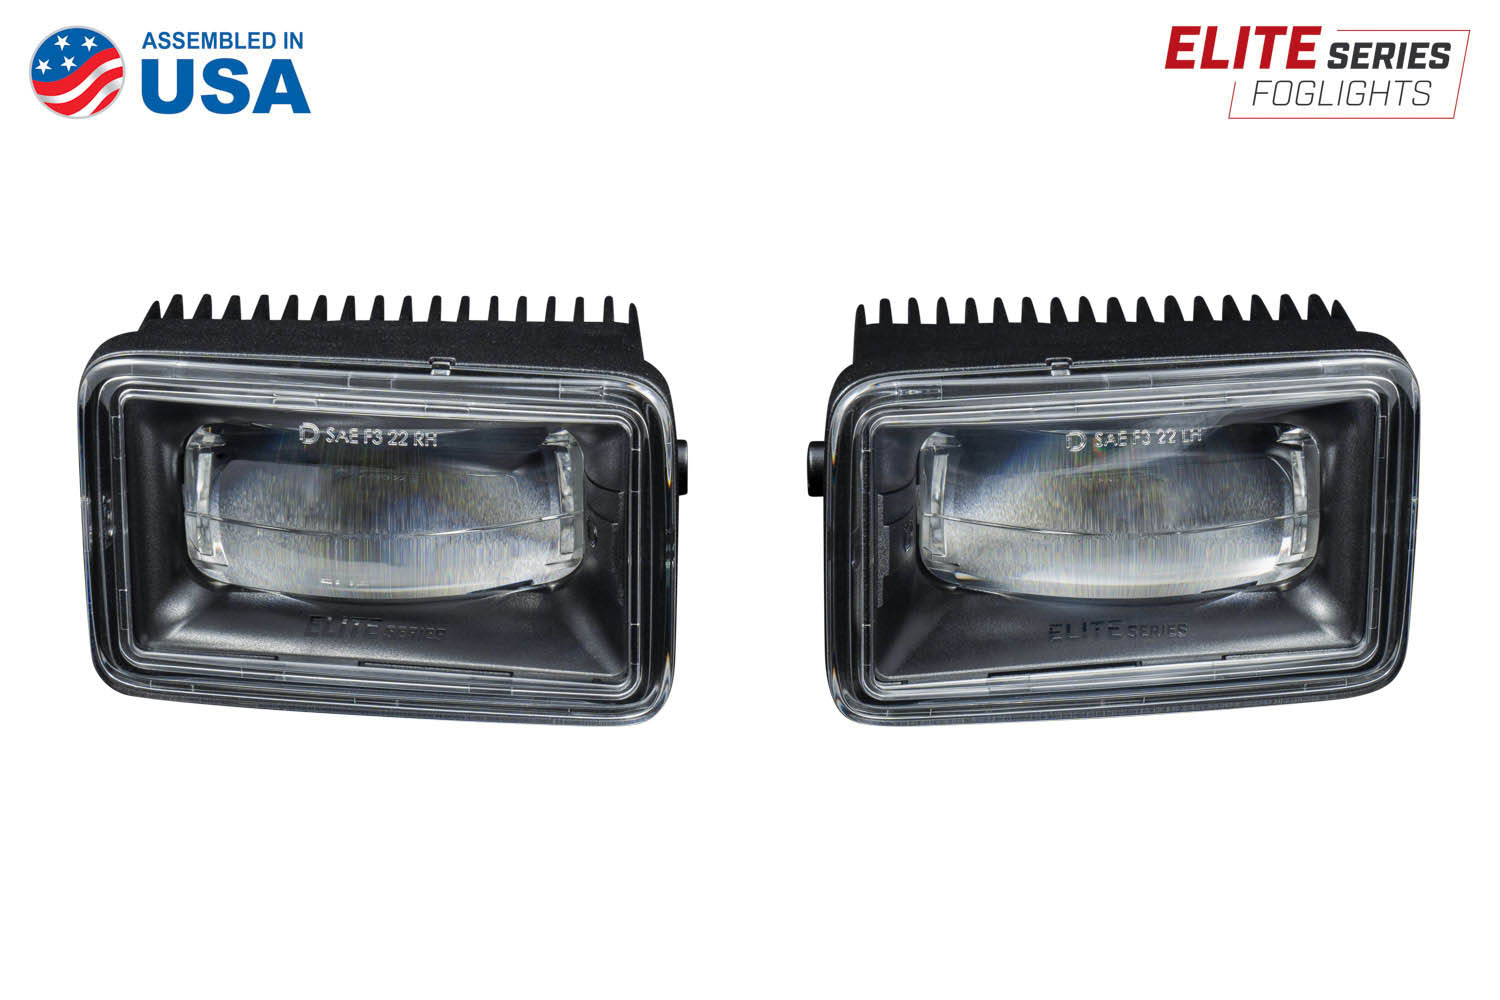 Elite Series LED Ford Fog Lights for F150 and F250 Out of Box